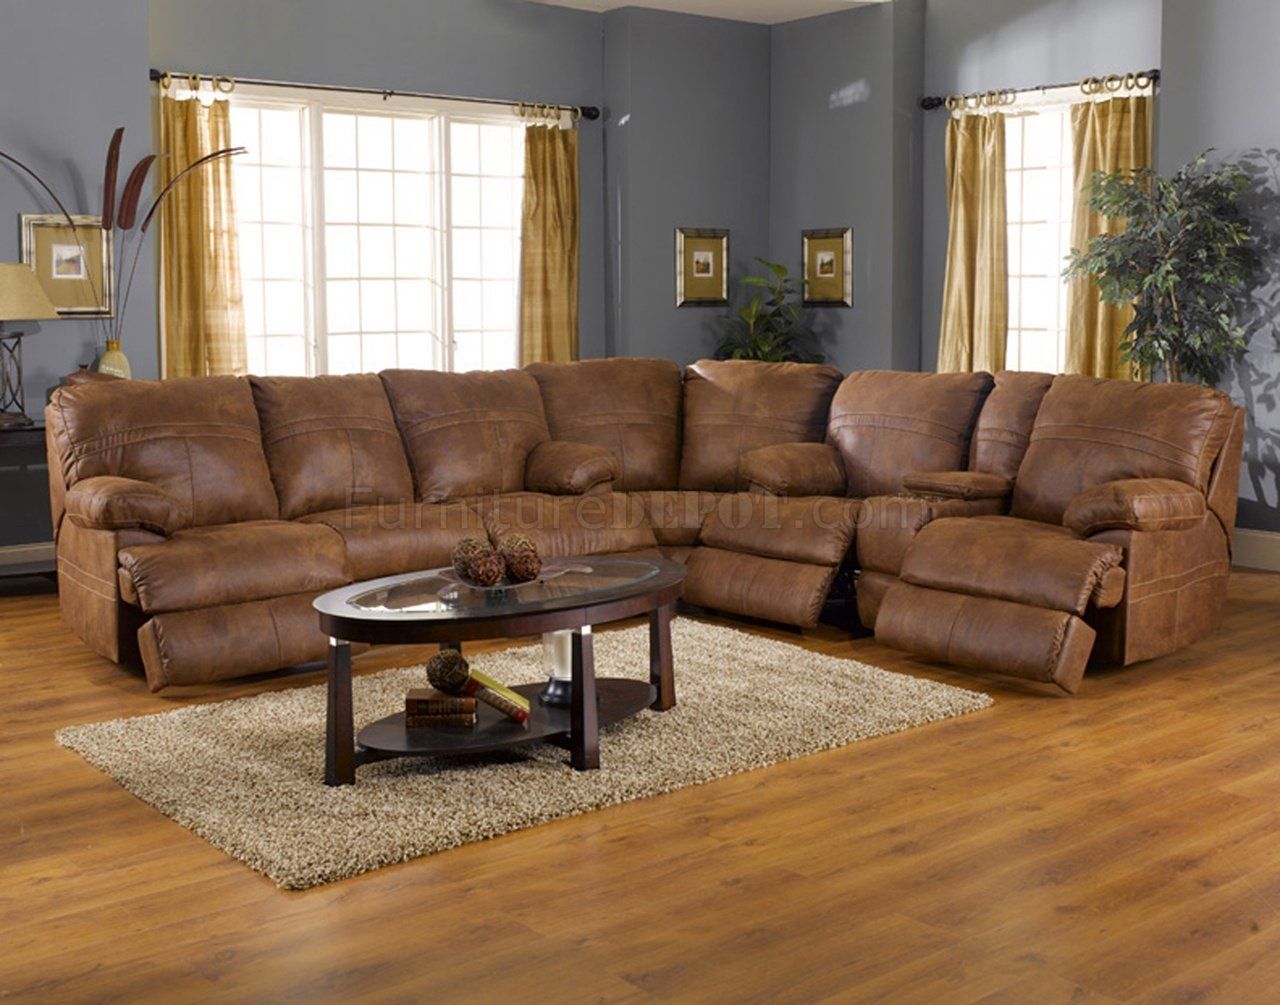 Rich Tanner Faux Leather Fabric Ranger Modern Sectional Sofa Regarding Faux Leather Sofas (View 12 of 15)